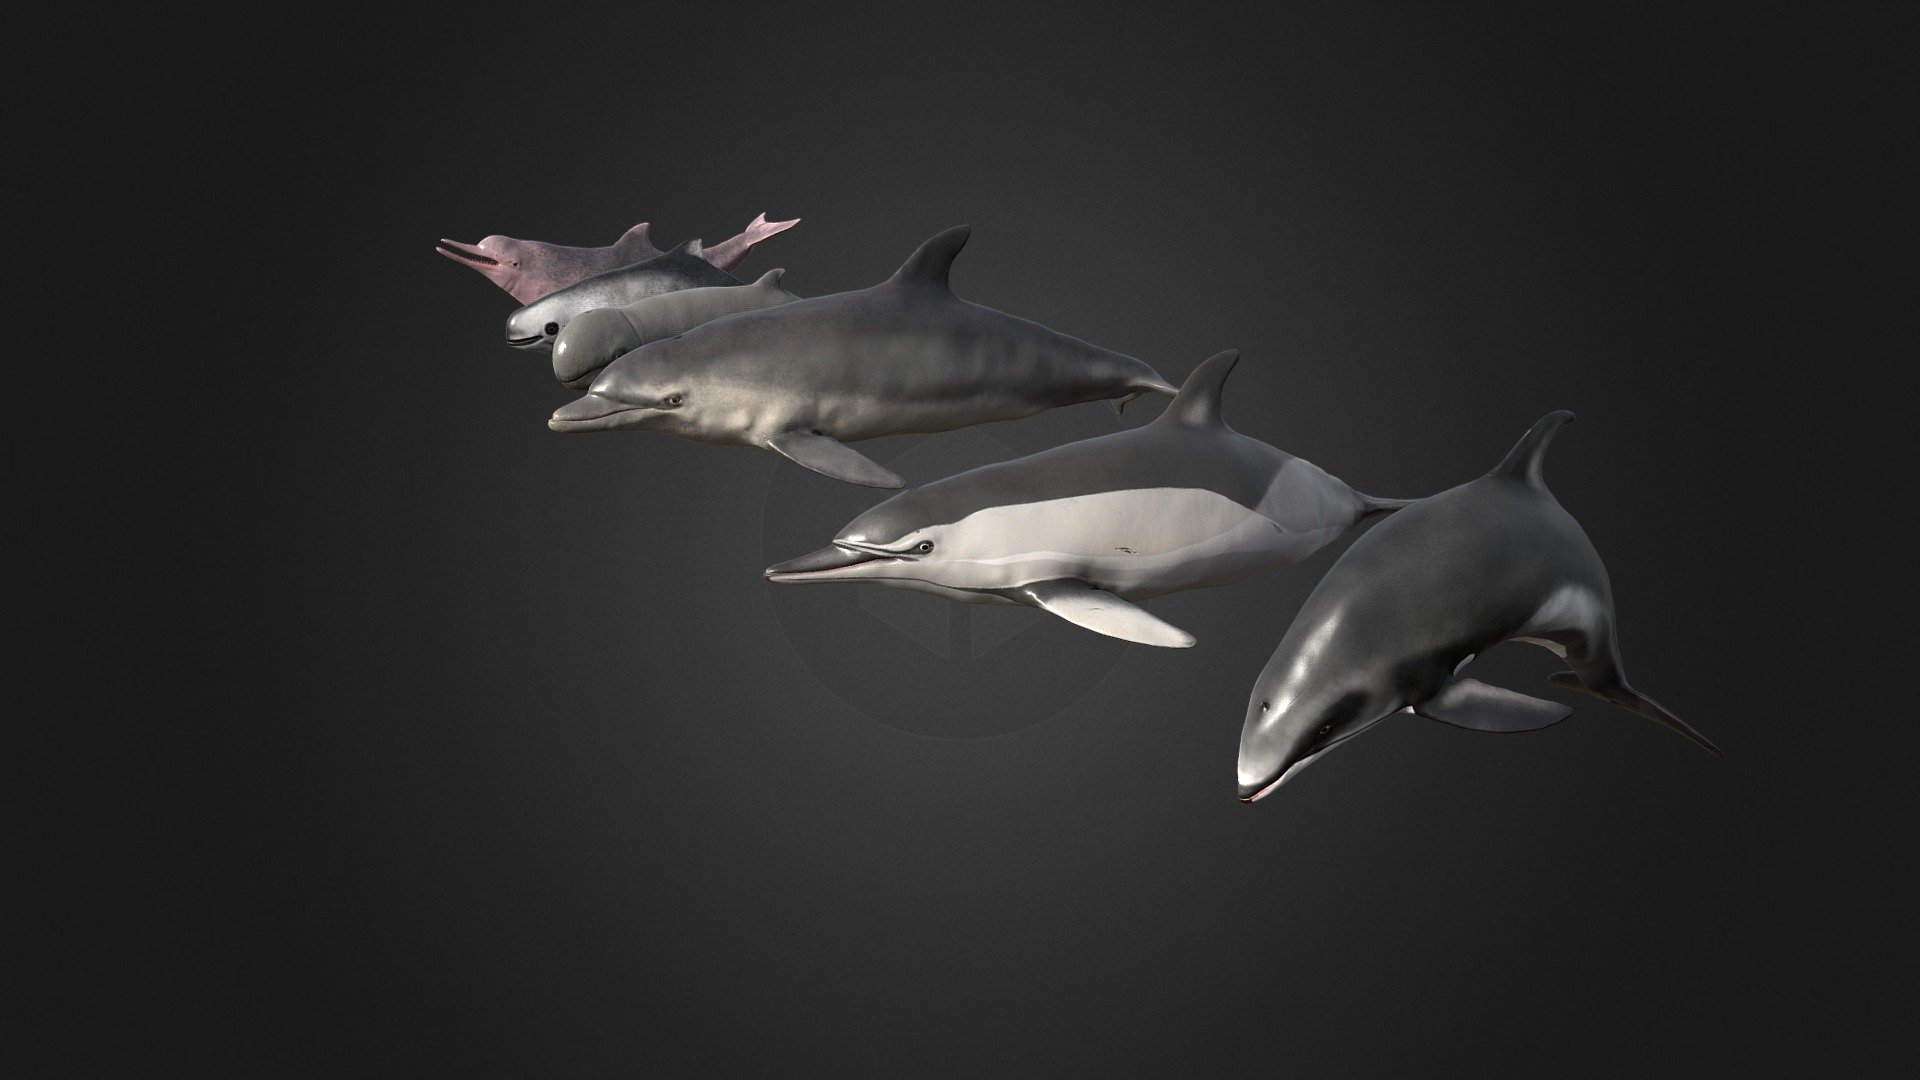 This asset has dolphins pack

Polygon count of :




Bottlenose Dolphin 17050 tris (3600 tris mobile version)

White-sided Dolphin 15650 tris (3800 tris mobile version)

Long-billed Dolphin 19900 tris (3500 tris mobile version)

Irawaddy Dolphin 14200 tris (3800 tris mobile version)

Chinese Dolphin 12850 tris (3550 tris mobile version)

Harbour Porpoise 13800 tris (3300 tris mobile version)

All model have 4 LODs.

Texture dimensions: 2048*2048.

You can view each model separately using the links below.




Bottlenose Dolphin 

White-sided Dolphin 

 Long-billed Dolphin 

Irawaddy Dolphin 

Chinese Dolphin 

Harbour Porpoise 

If you have any questions, please contact us by mail: Chester9292@mail.ru - Pack of dolphins - Buy Royalty Free 3D model by Rifat3D 3d model